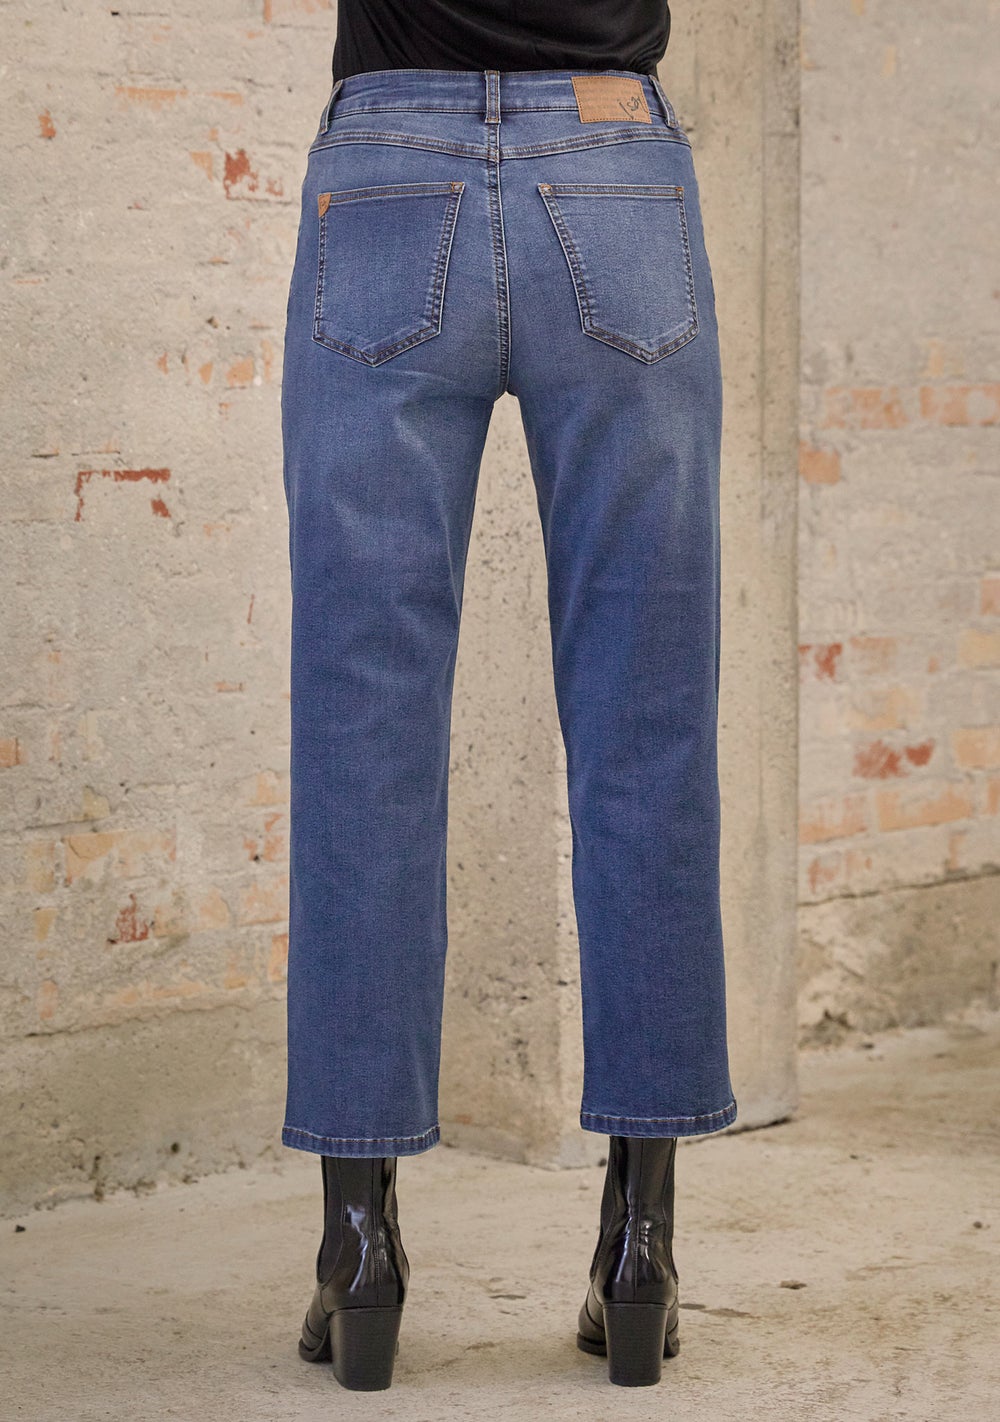 Isay - Lido Straight Jeans-Blue Wash Denim